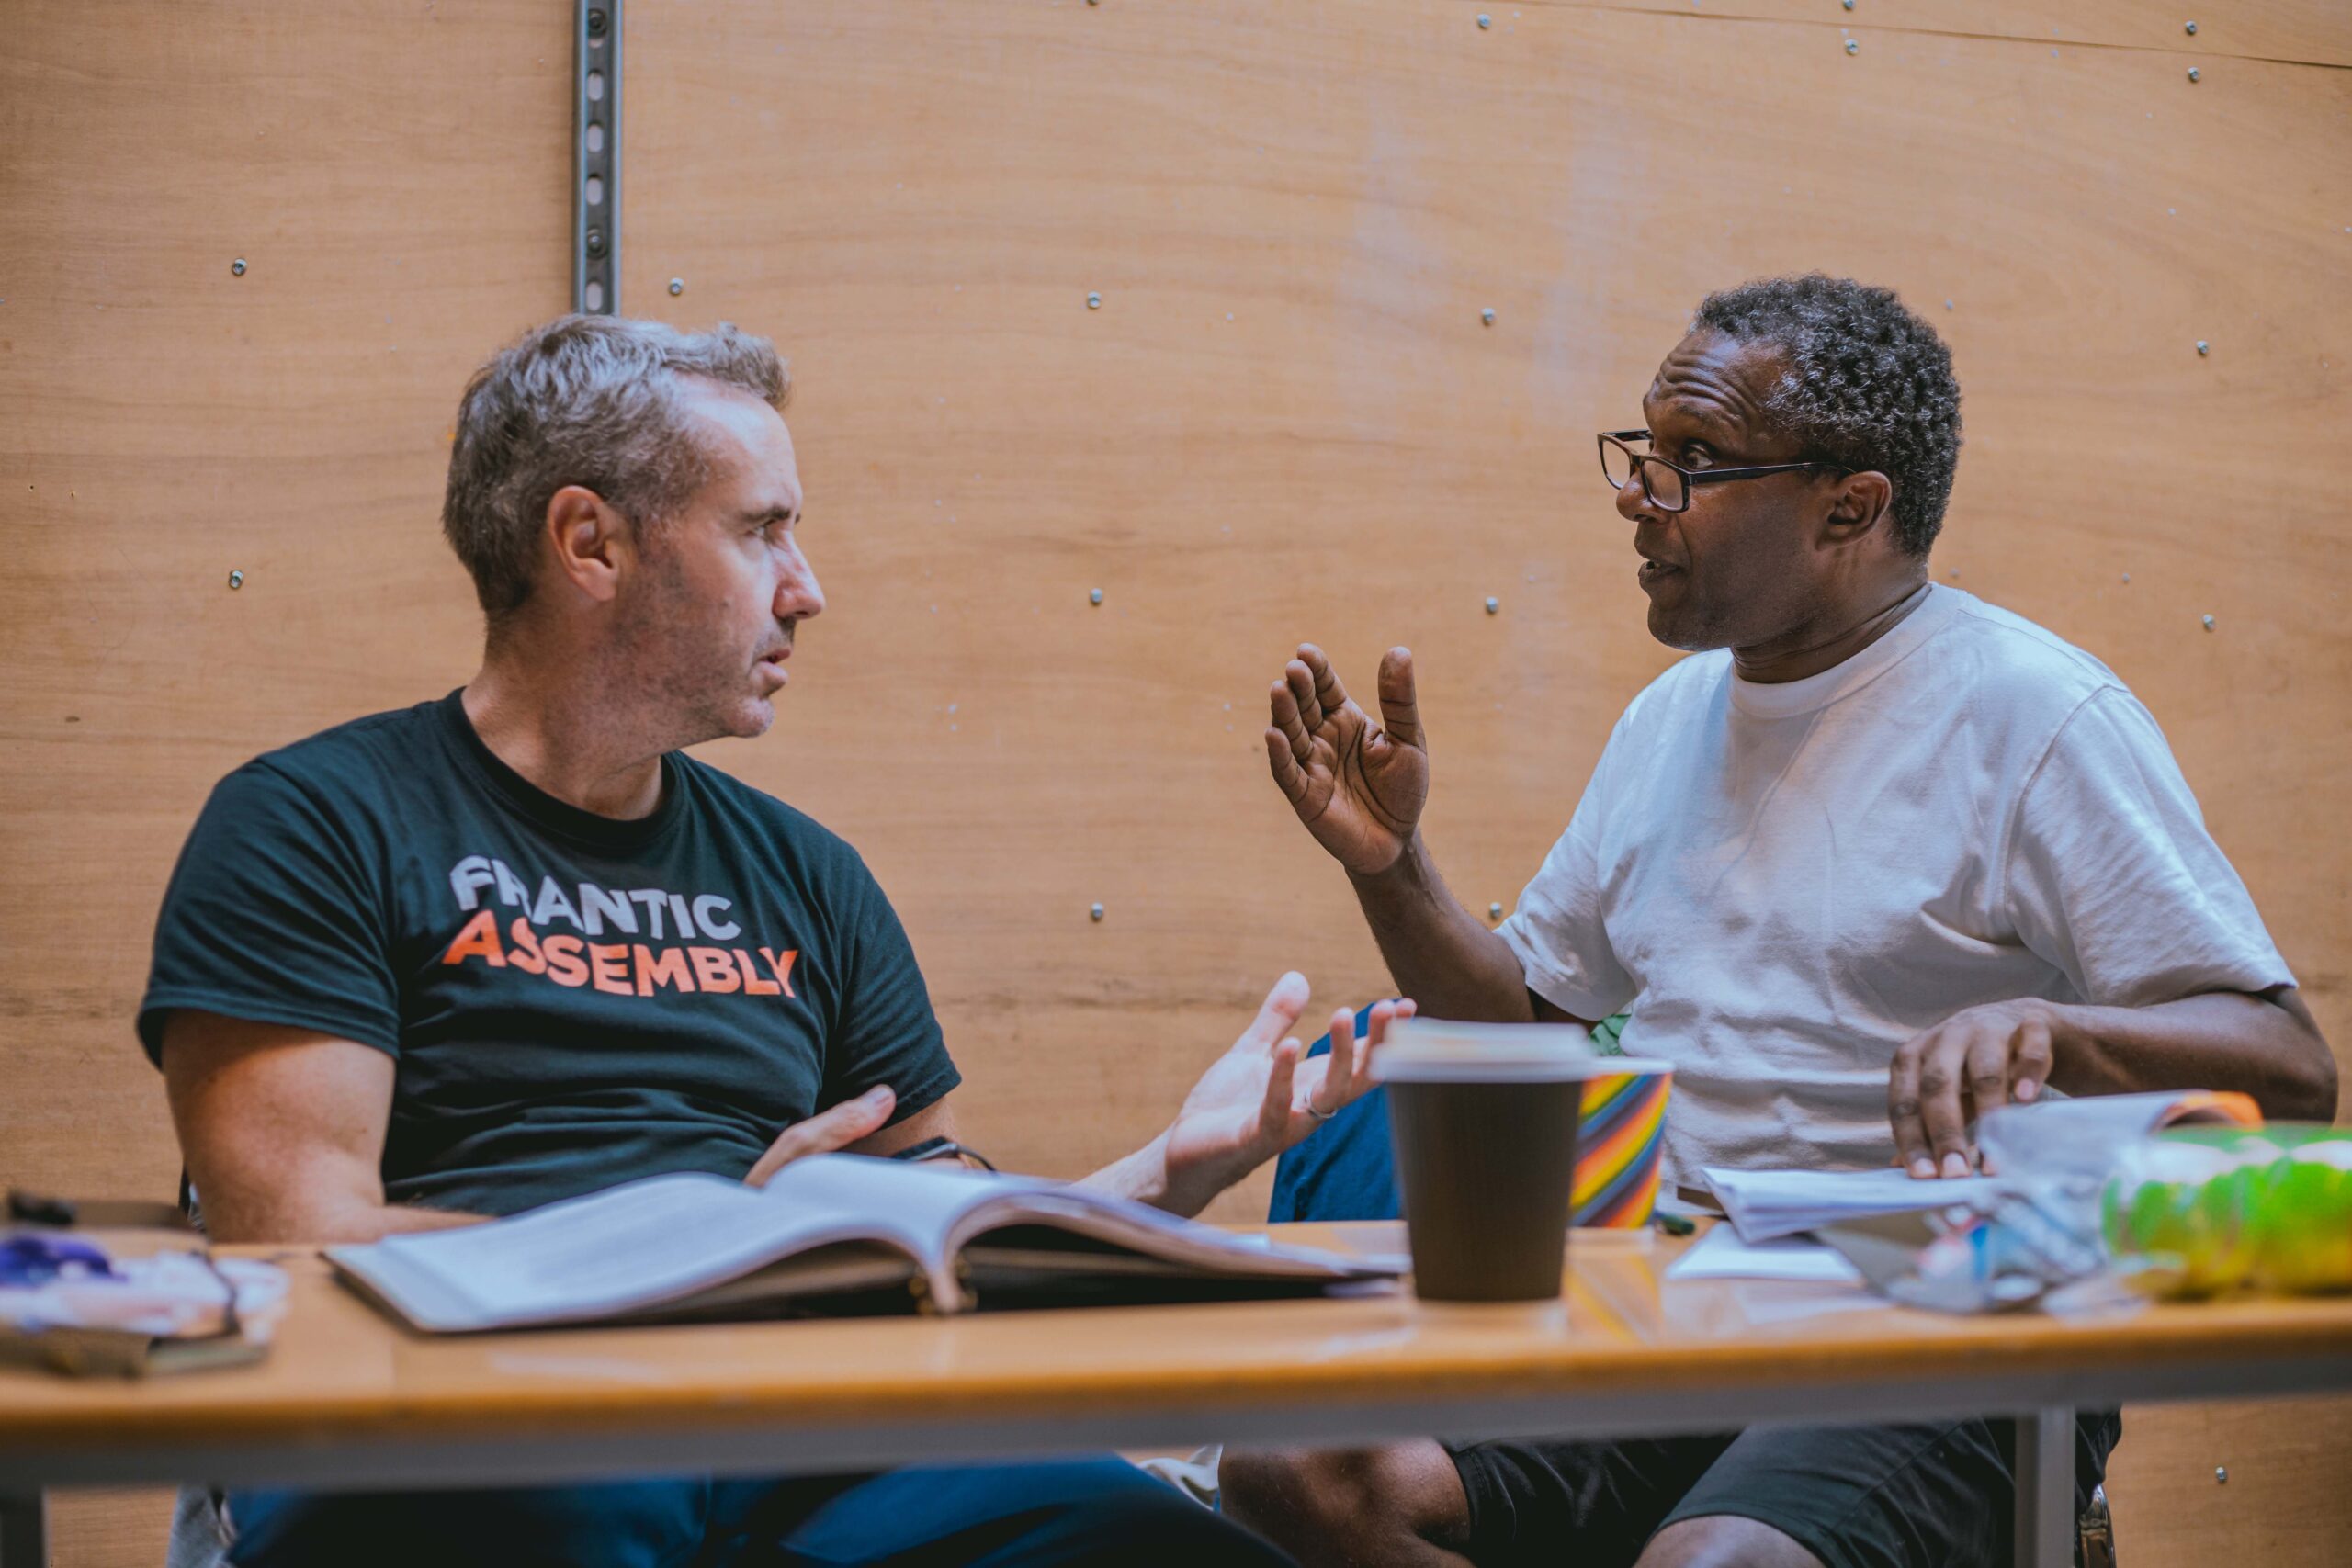 In a wood-cladded rehearsal room, Frantic Assembly Artistic Director Scott Graham is in discussion with Adaptor Lemn Sissay OBE. Both are deep in discussion with one another. Scott is wearing a black t-shirt with the Frantic Assembly logo while Lemn is wearing a plain white t-shirt.